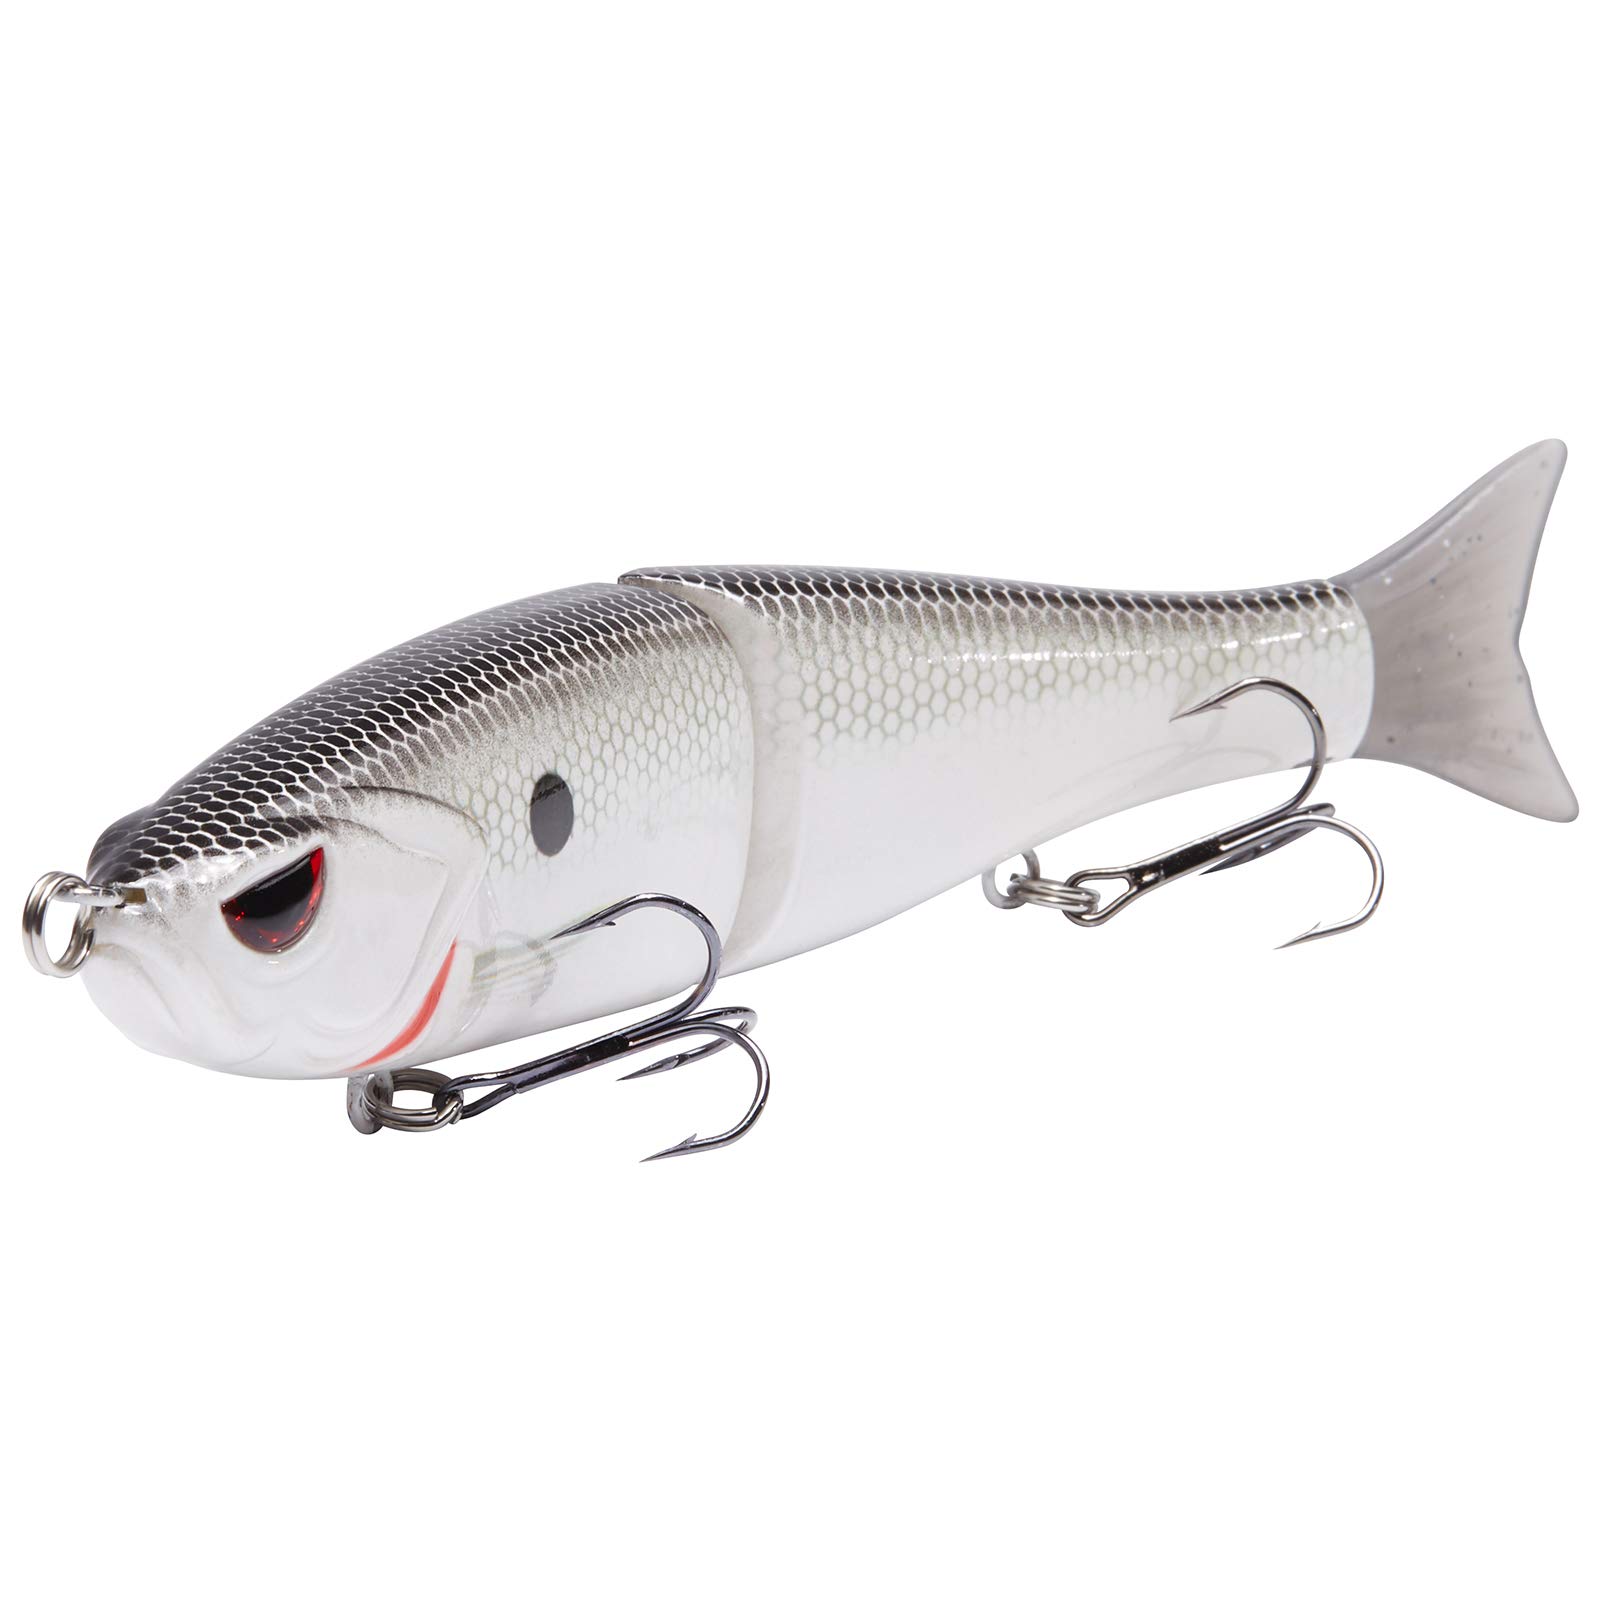 Bassdash SwimShad Glide Baits Jointed Swimbait Bass Pike Salmon Trout  Muskie Fishing Lure White Shad 7in/